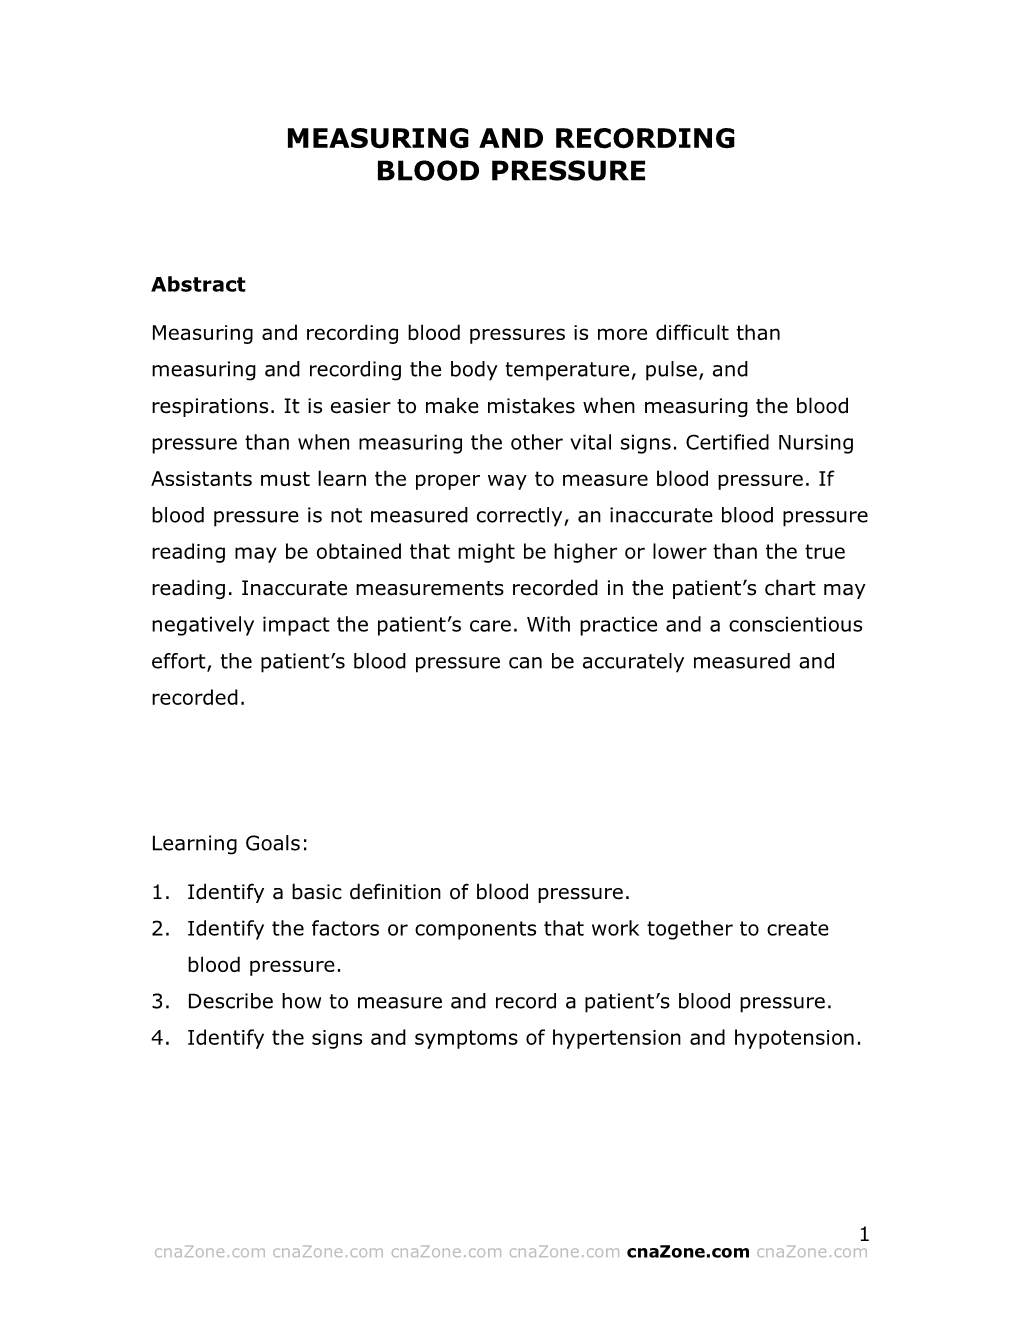 Measuring and Recording Blood Pressure